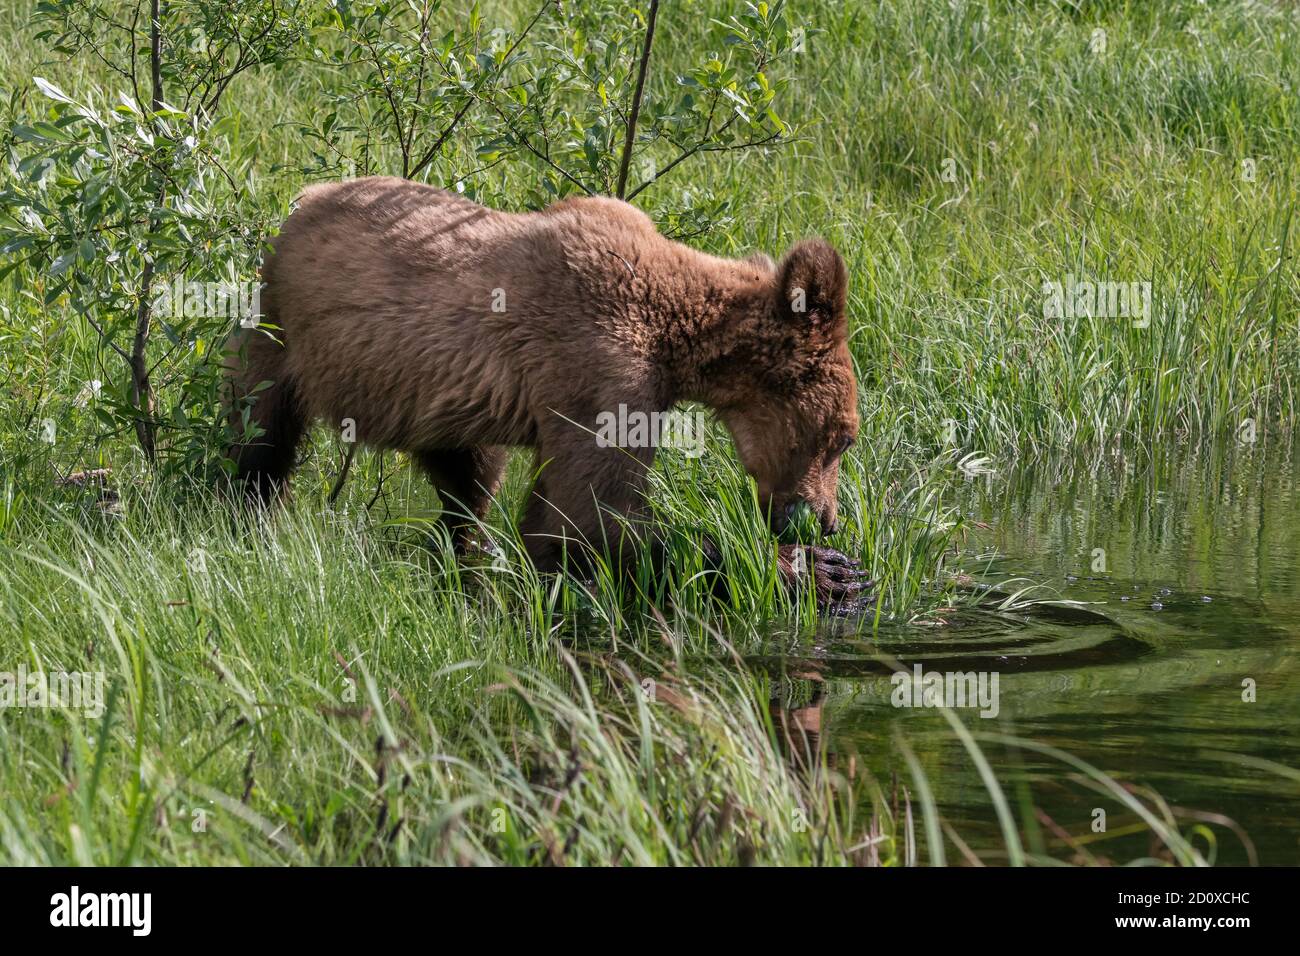 Grizzly cub grabbing grass from the water with its long claws, Khutzeymateen, BC Stock Photo